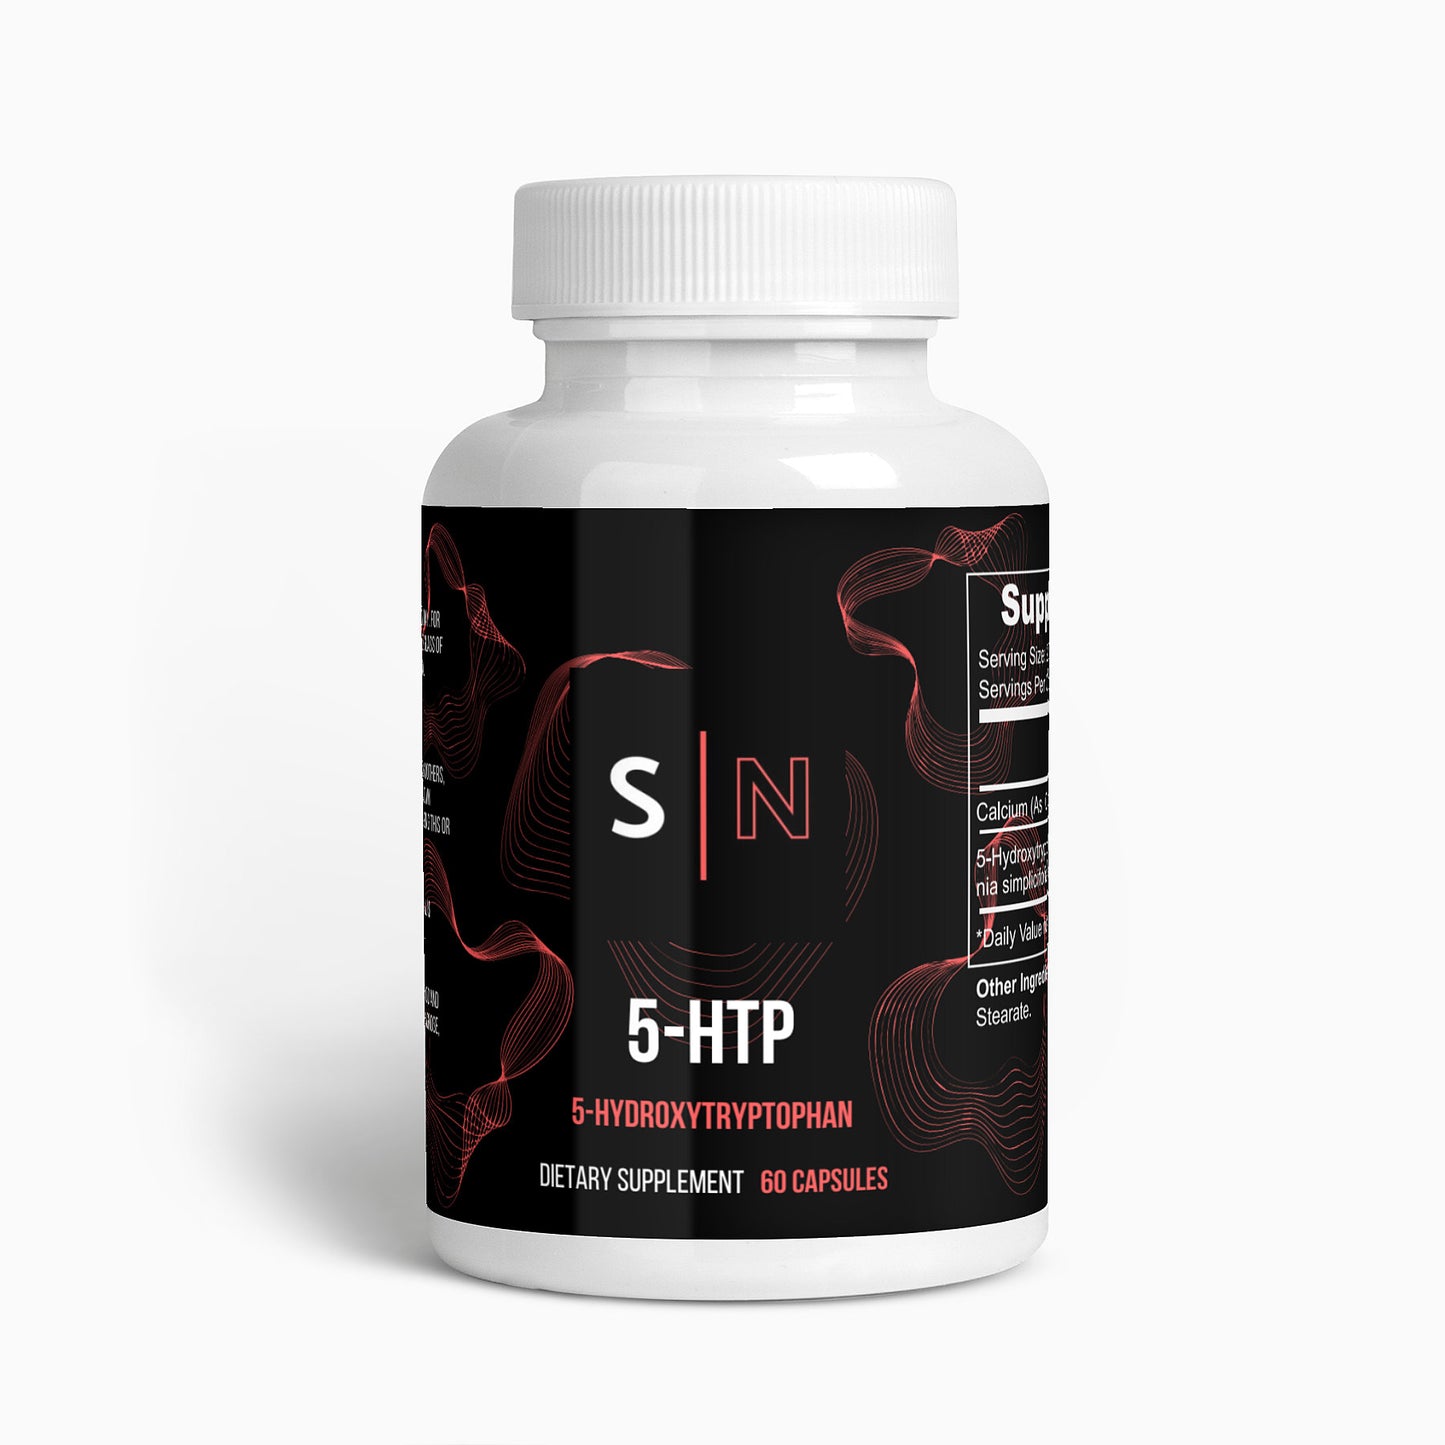 5-htp sport supplement with 60 capsules inside